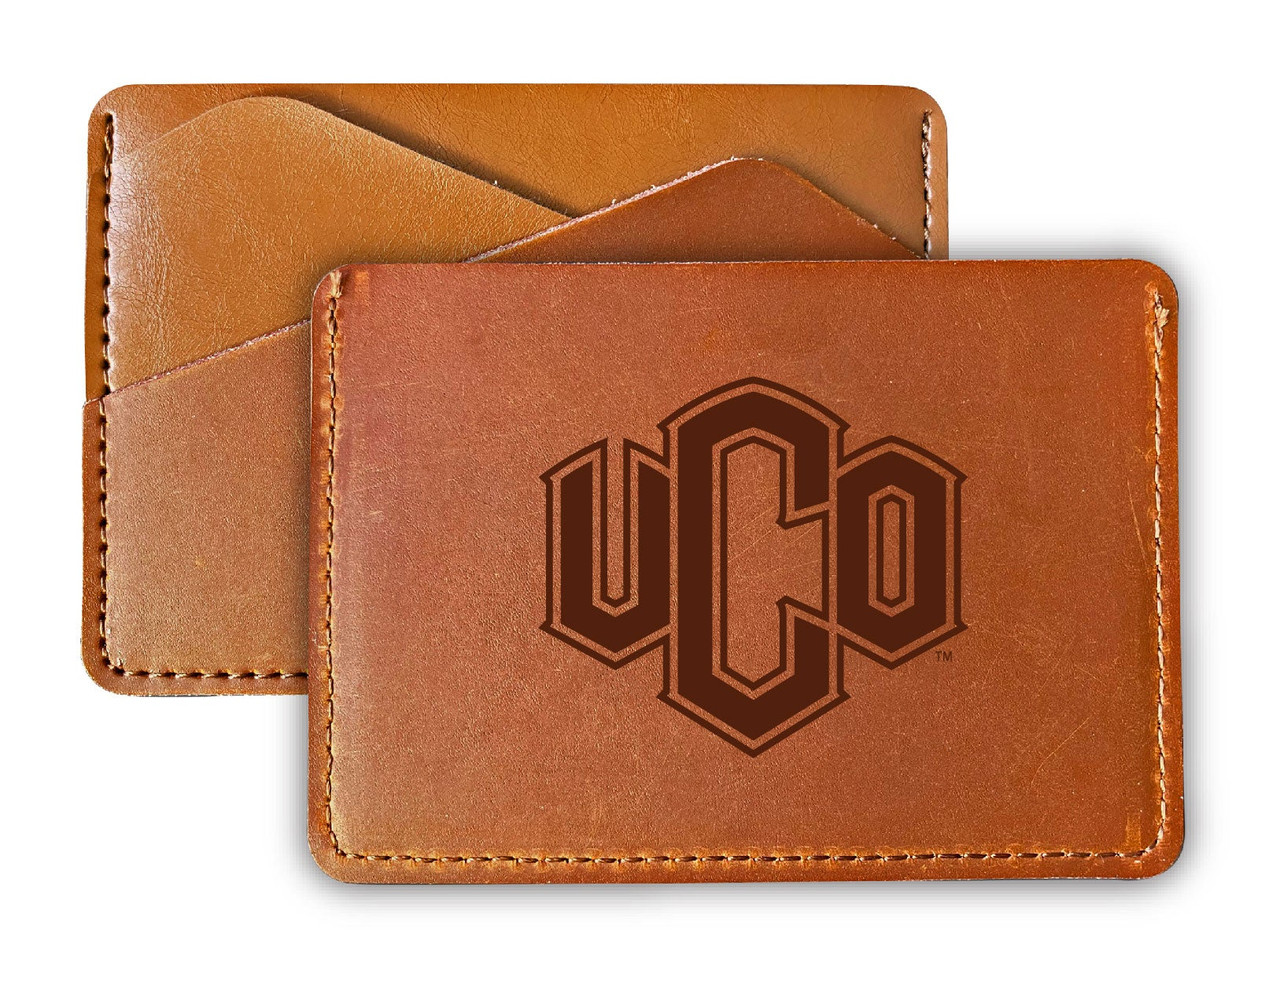 University of Central Oklahoma Bronchos College Leather Card Holder Wallet